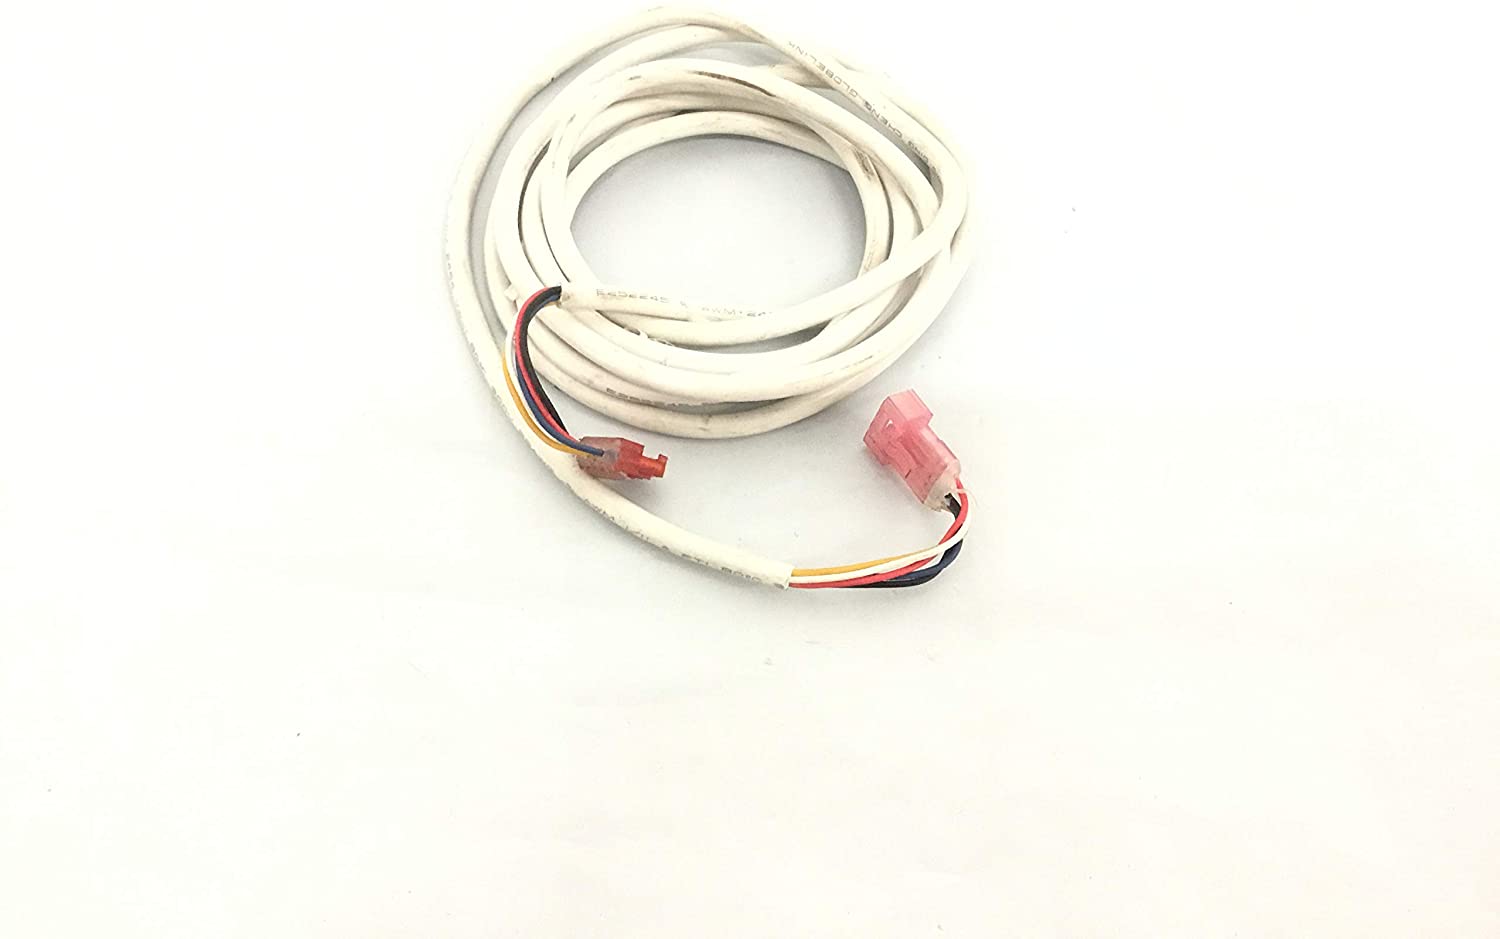 Icon Health & Fitness, Inc. Extension Wire Harness 357471 Works with NordicTrack FS7I - NTEL713170 Elliptical